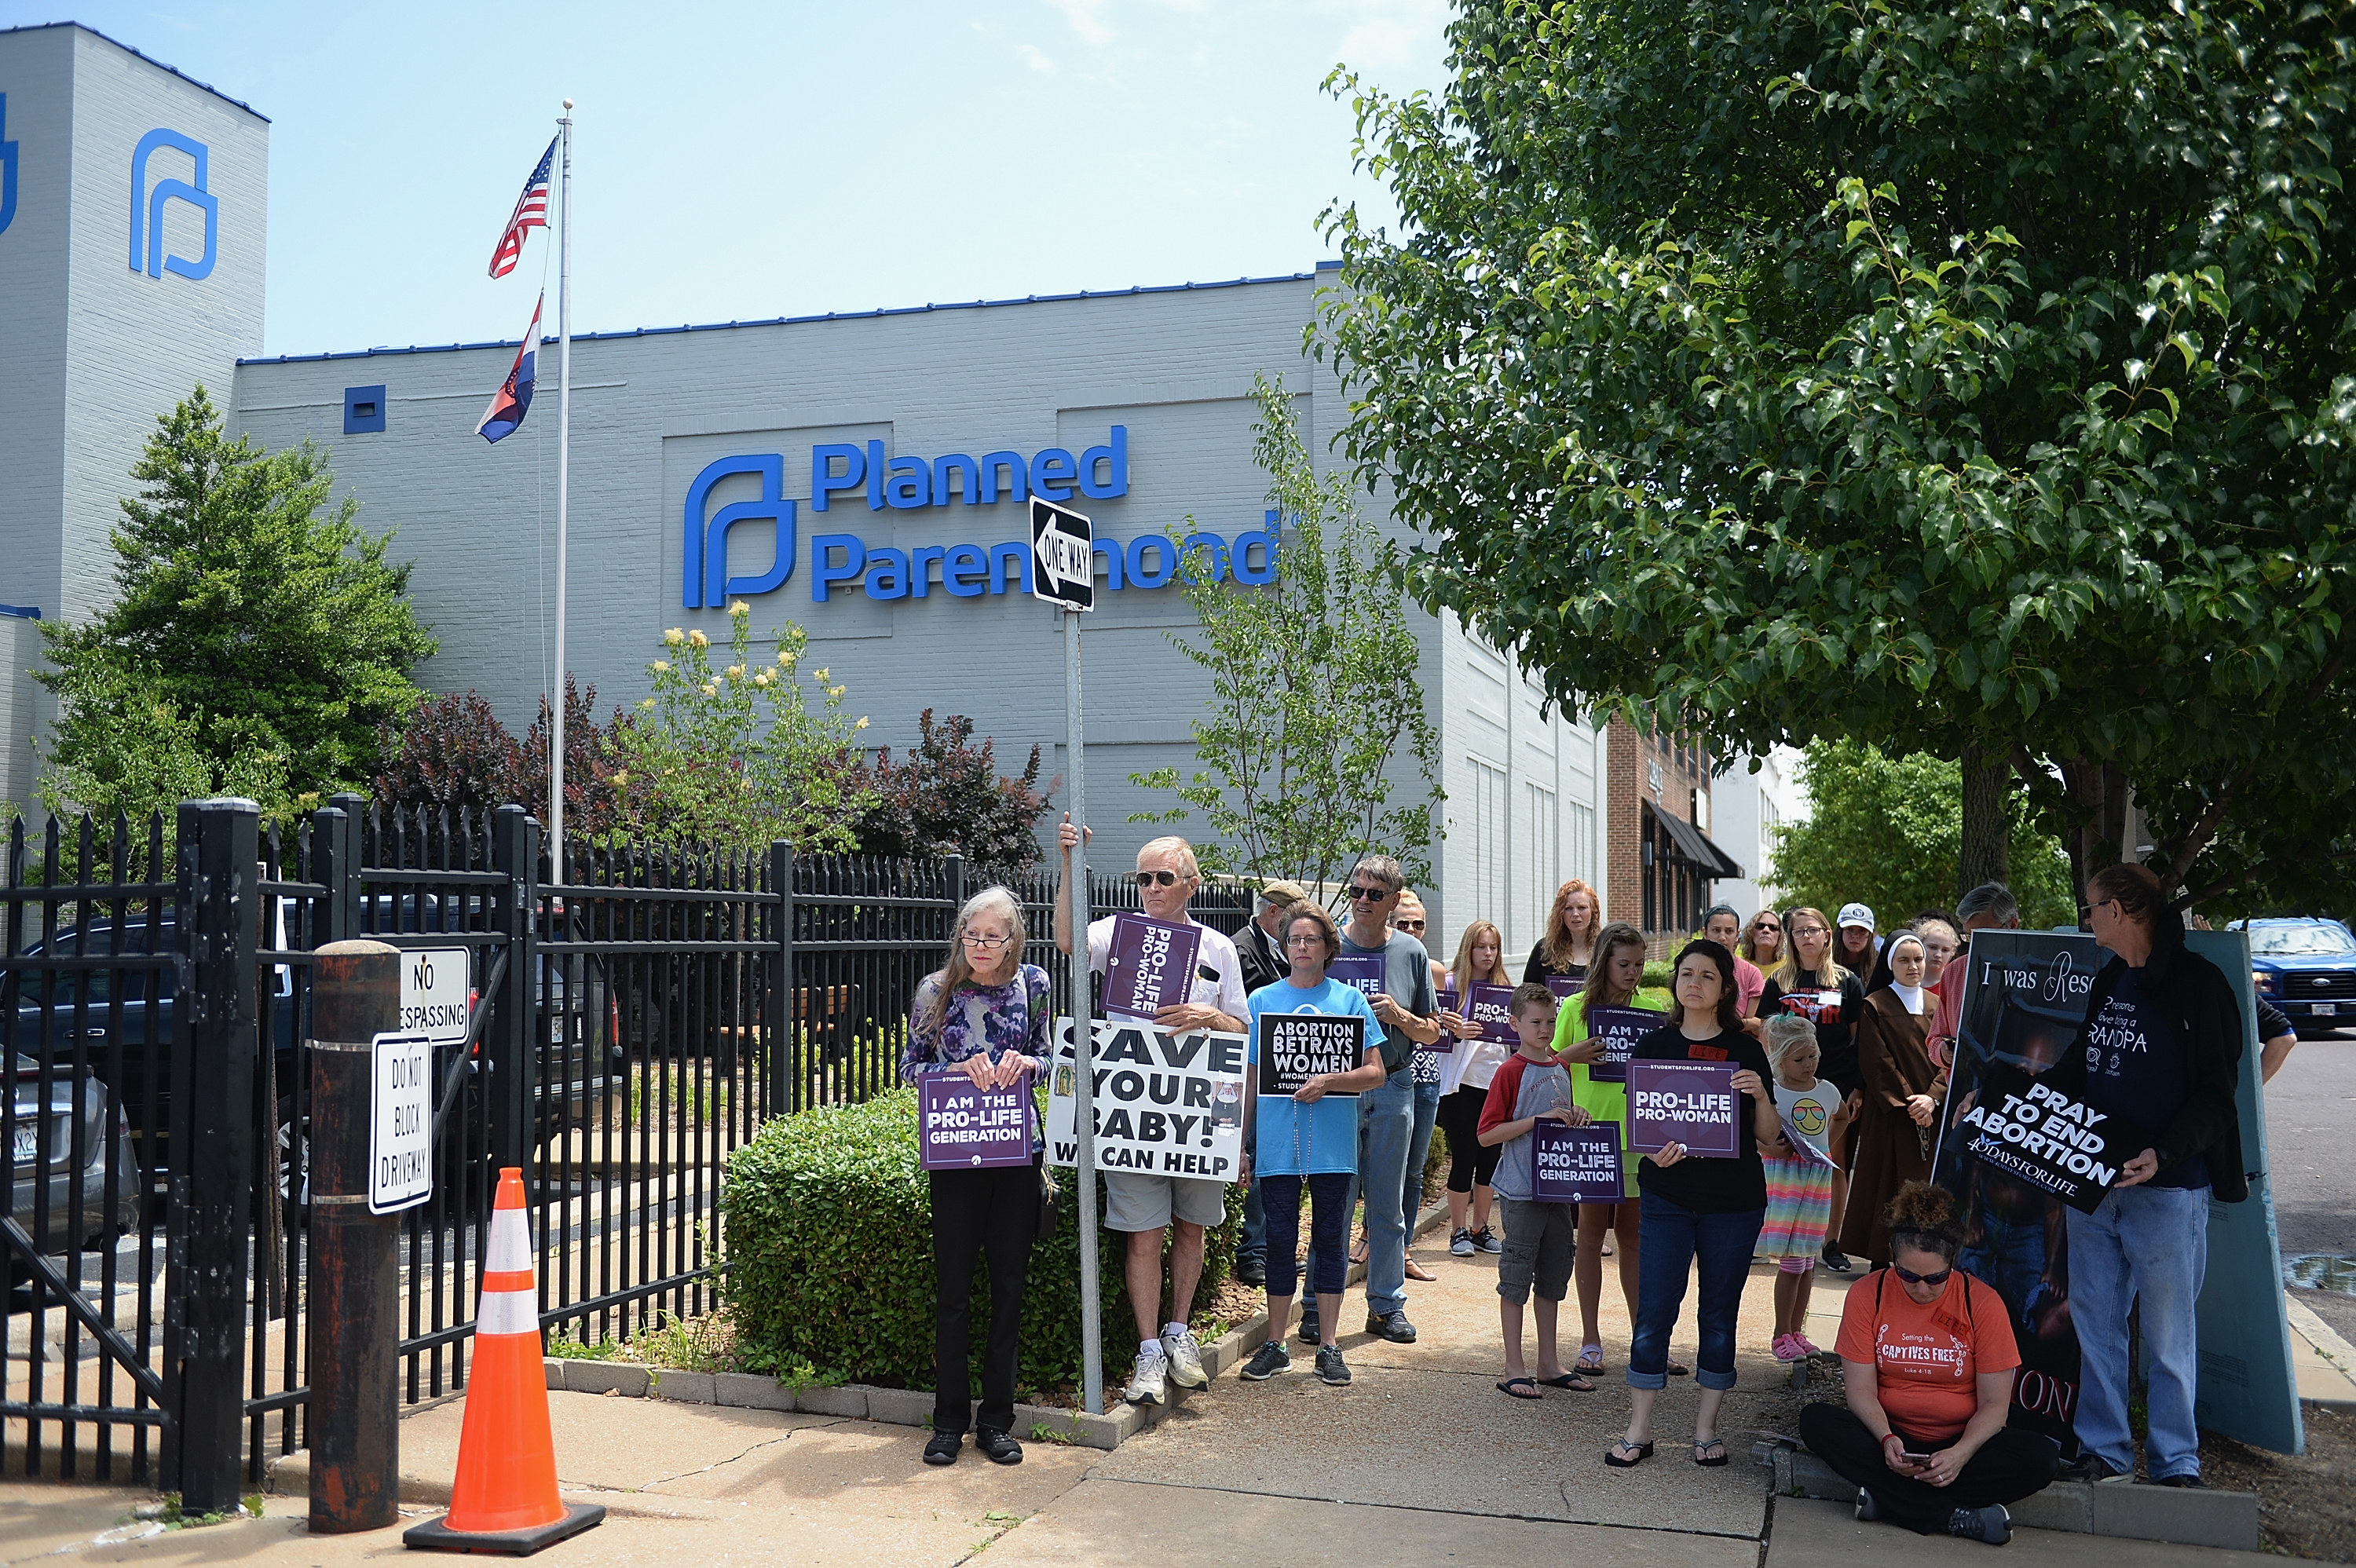 People stand holding signs, including &quot;Save your baby!&quot; and &quot;Pray to end abortion&quot;